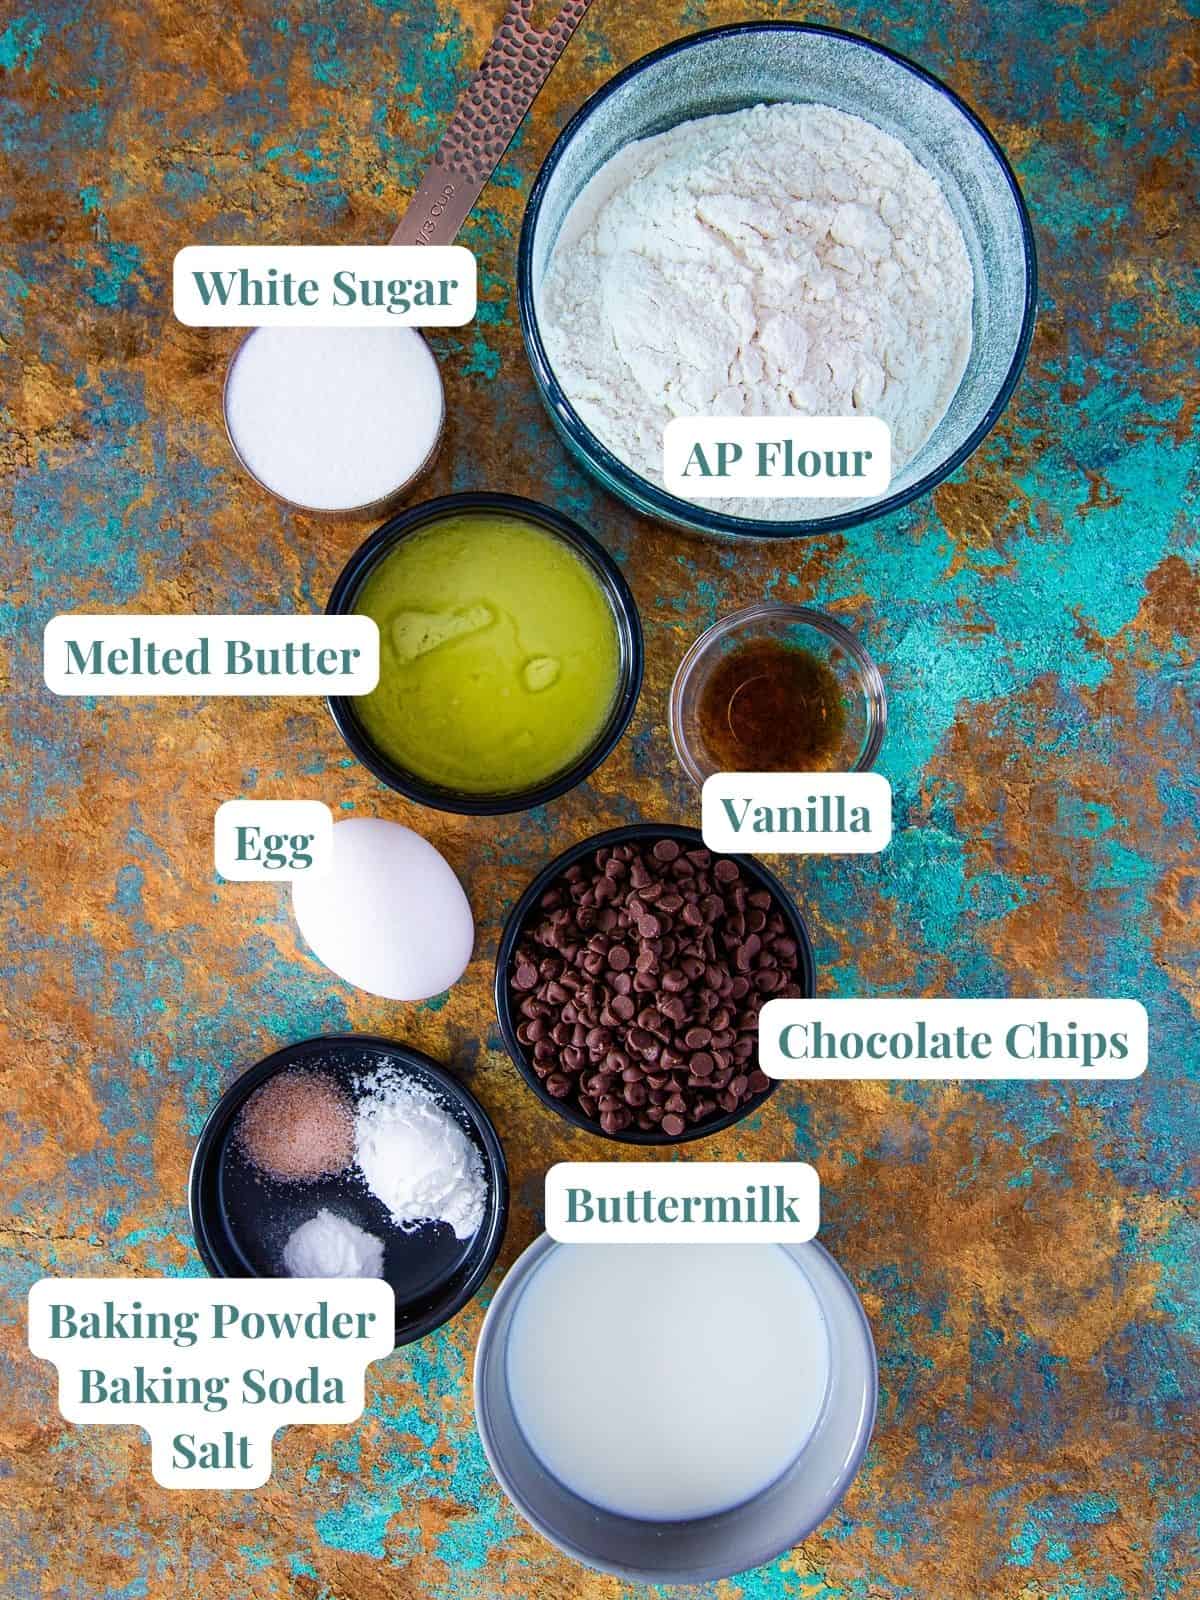 Ingredients for baked chocolate chip donuts.